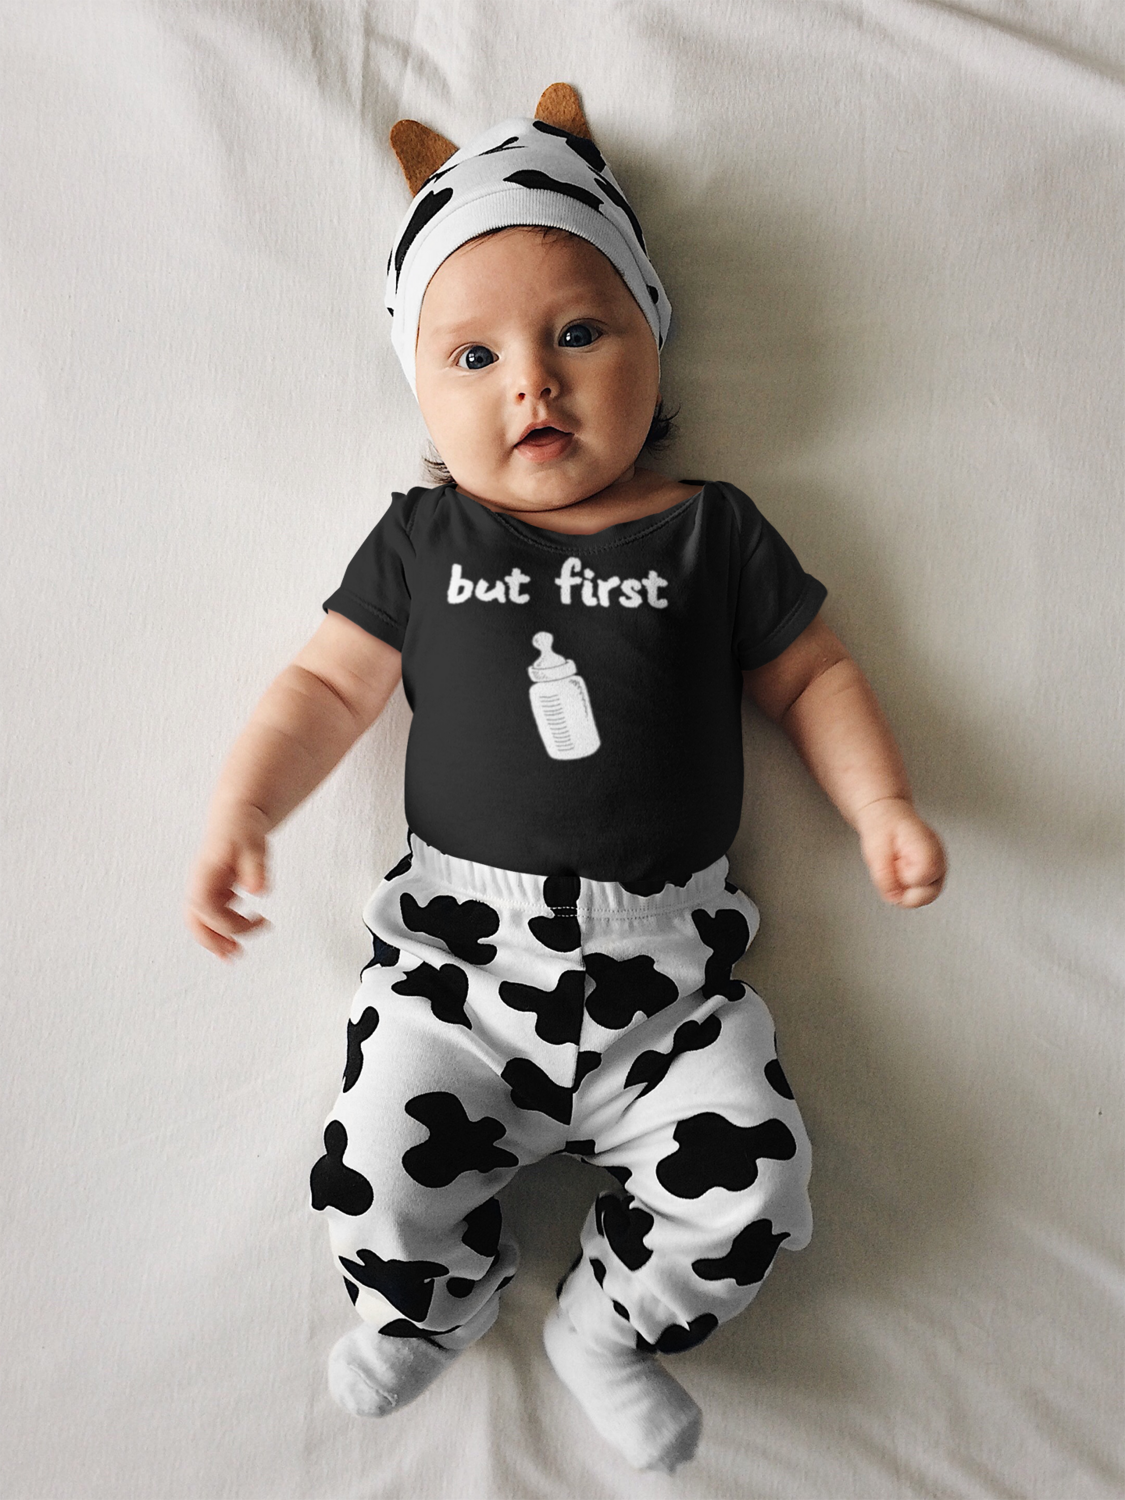 But First Baba Baby Onesie